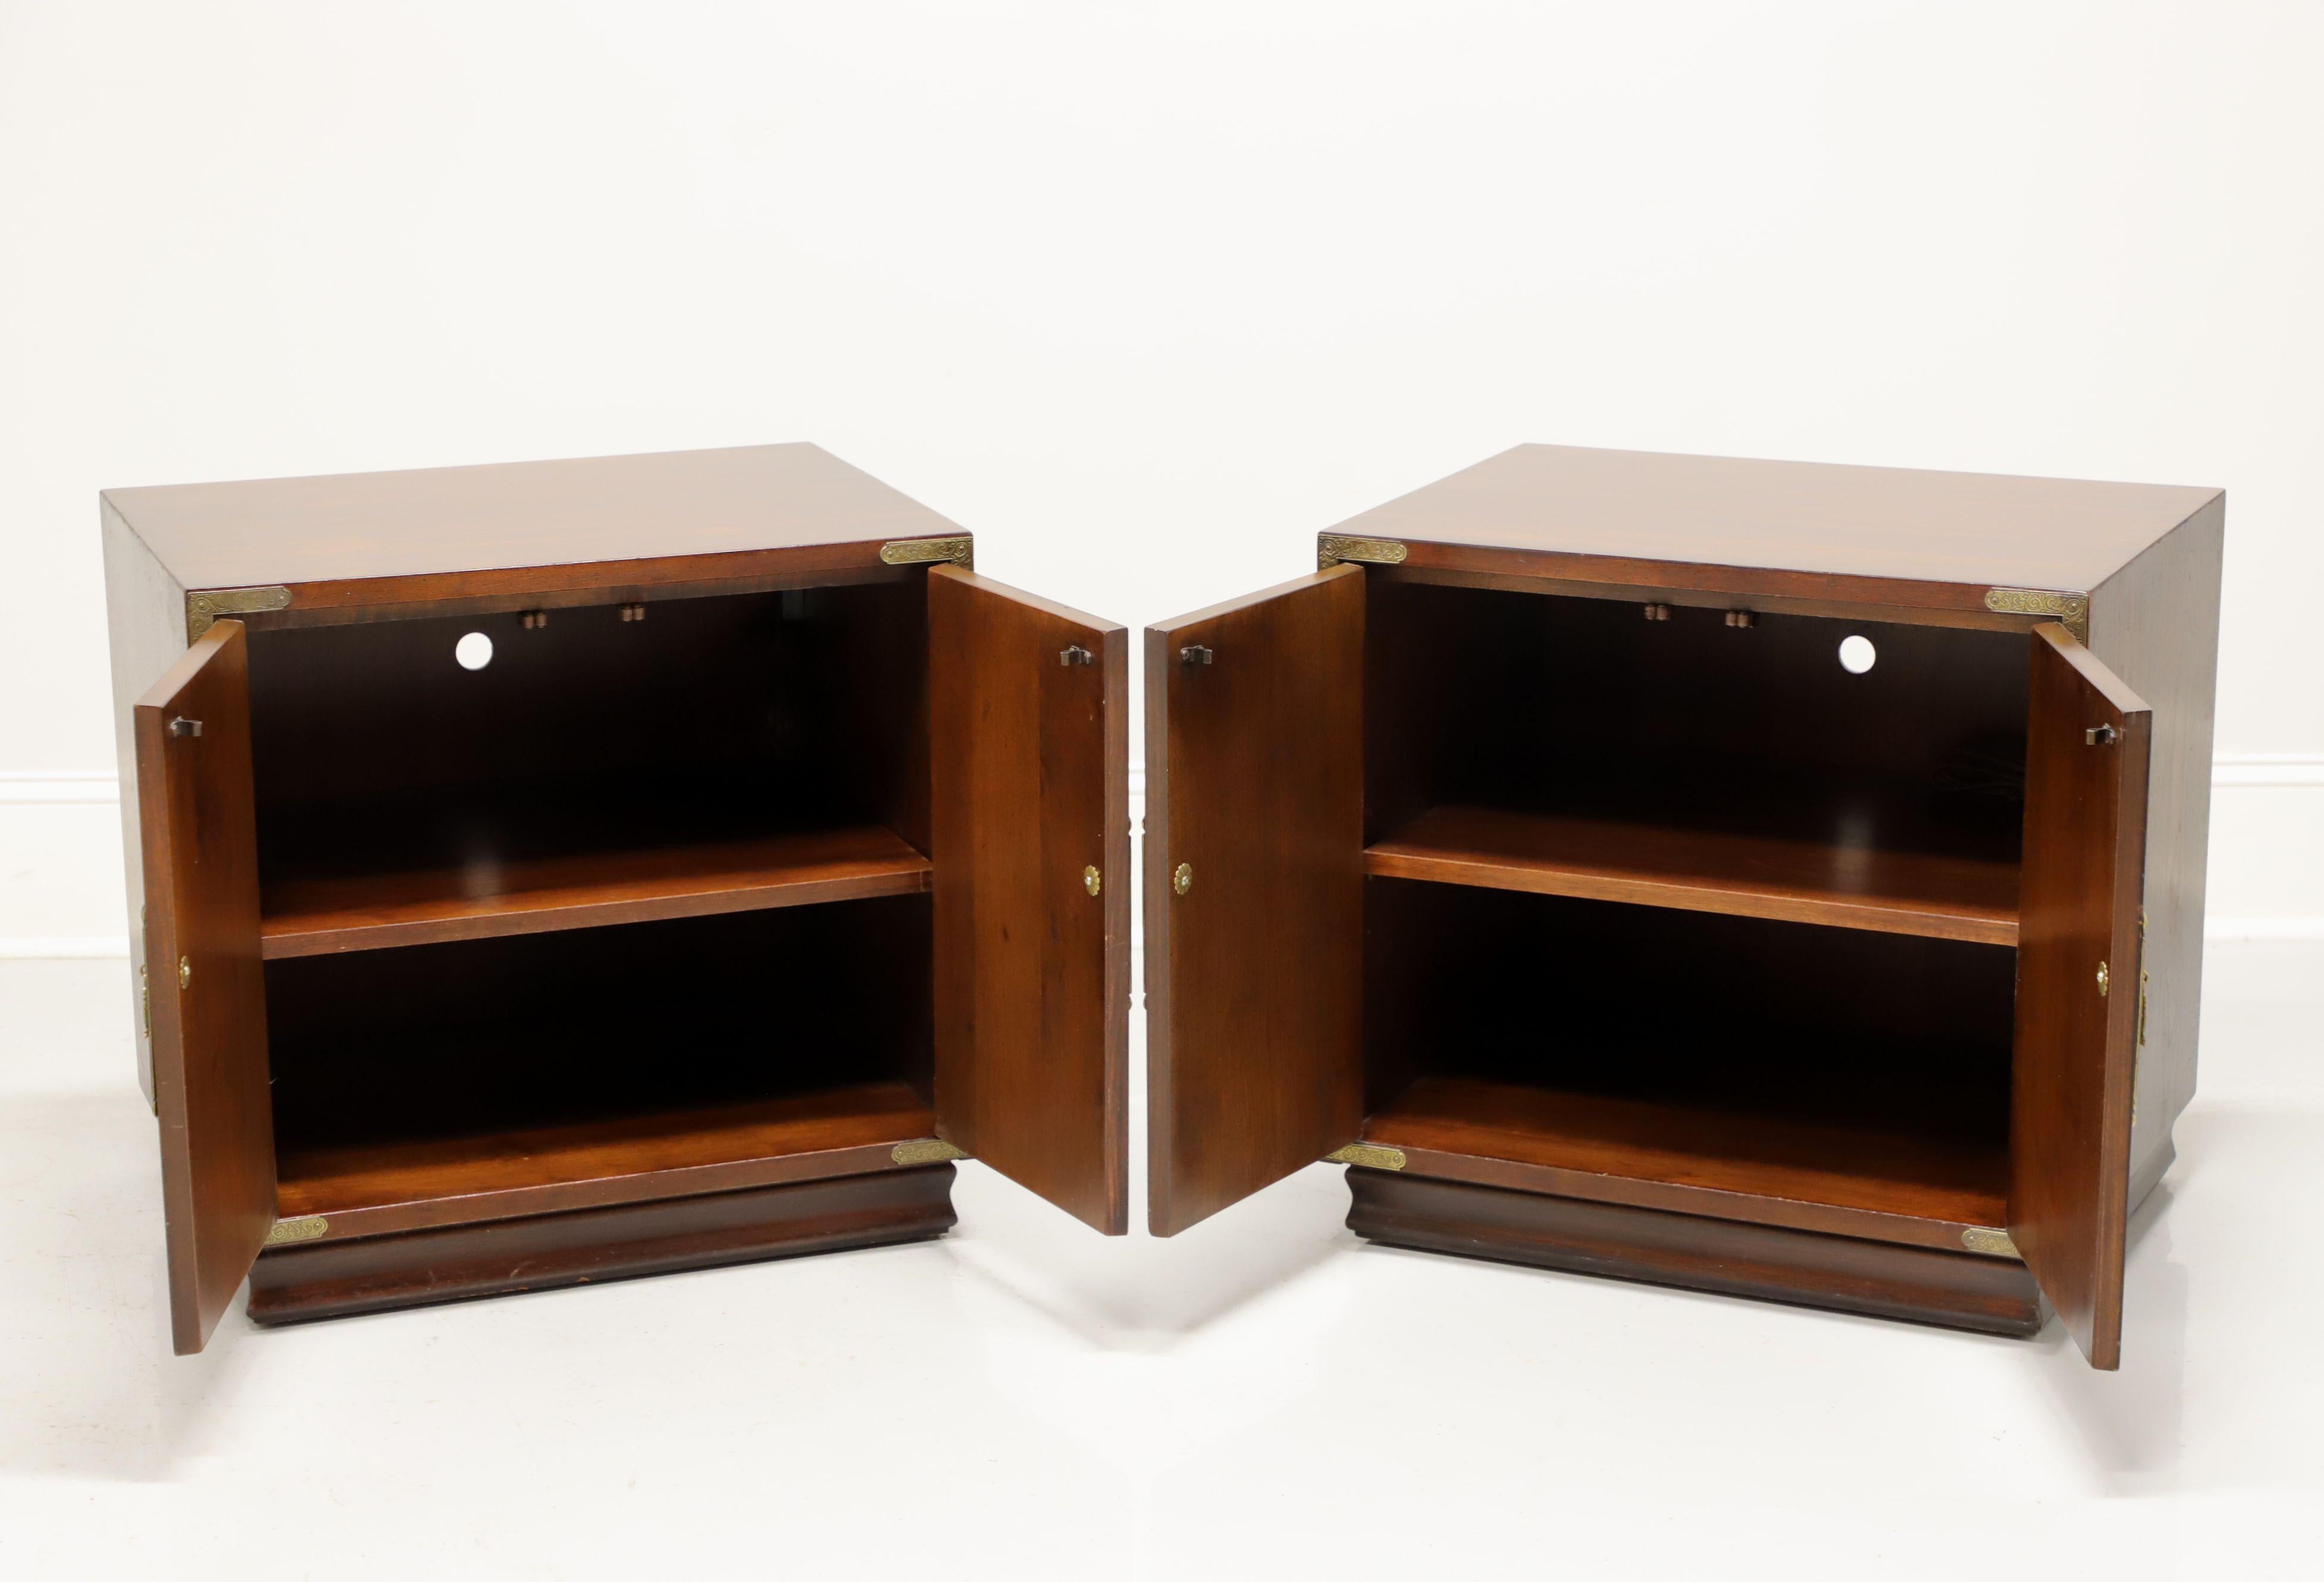 20th Century HENREDON Asian Japanese Tansu Campaign Bedside Cabinets / Nightstands - Pair